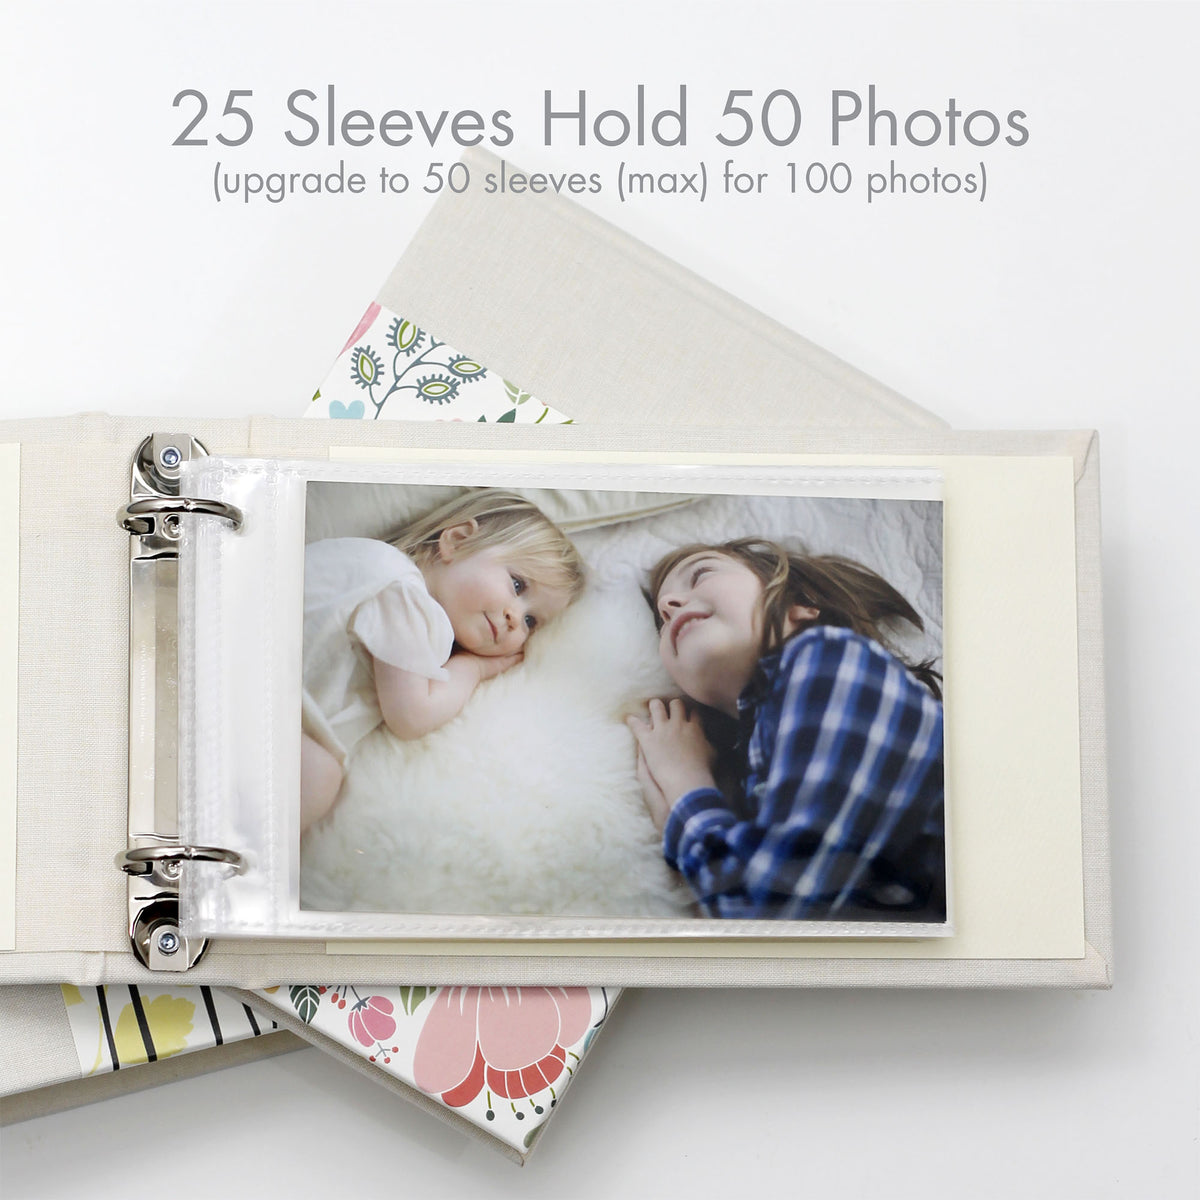 Small Photo Binder | Printed Cover: Blue Giraffe | 4x6 Photos | Available Personalized